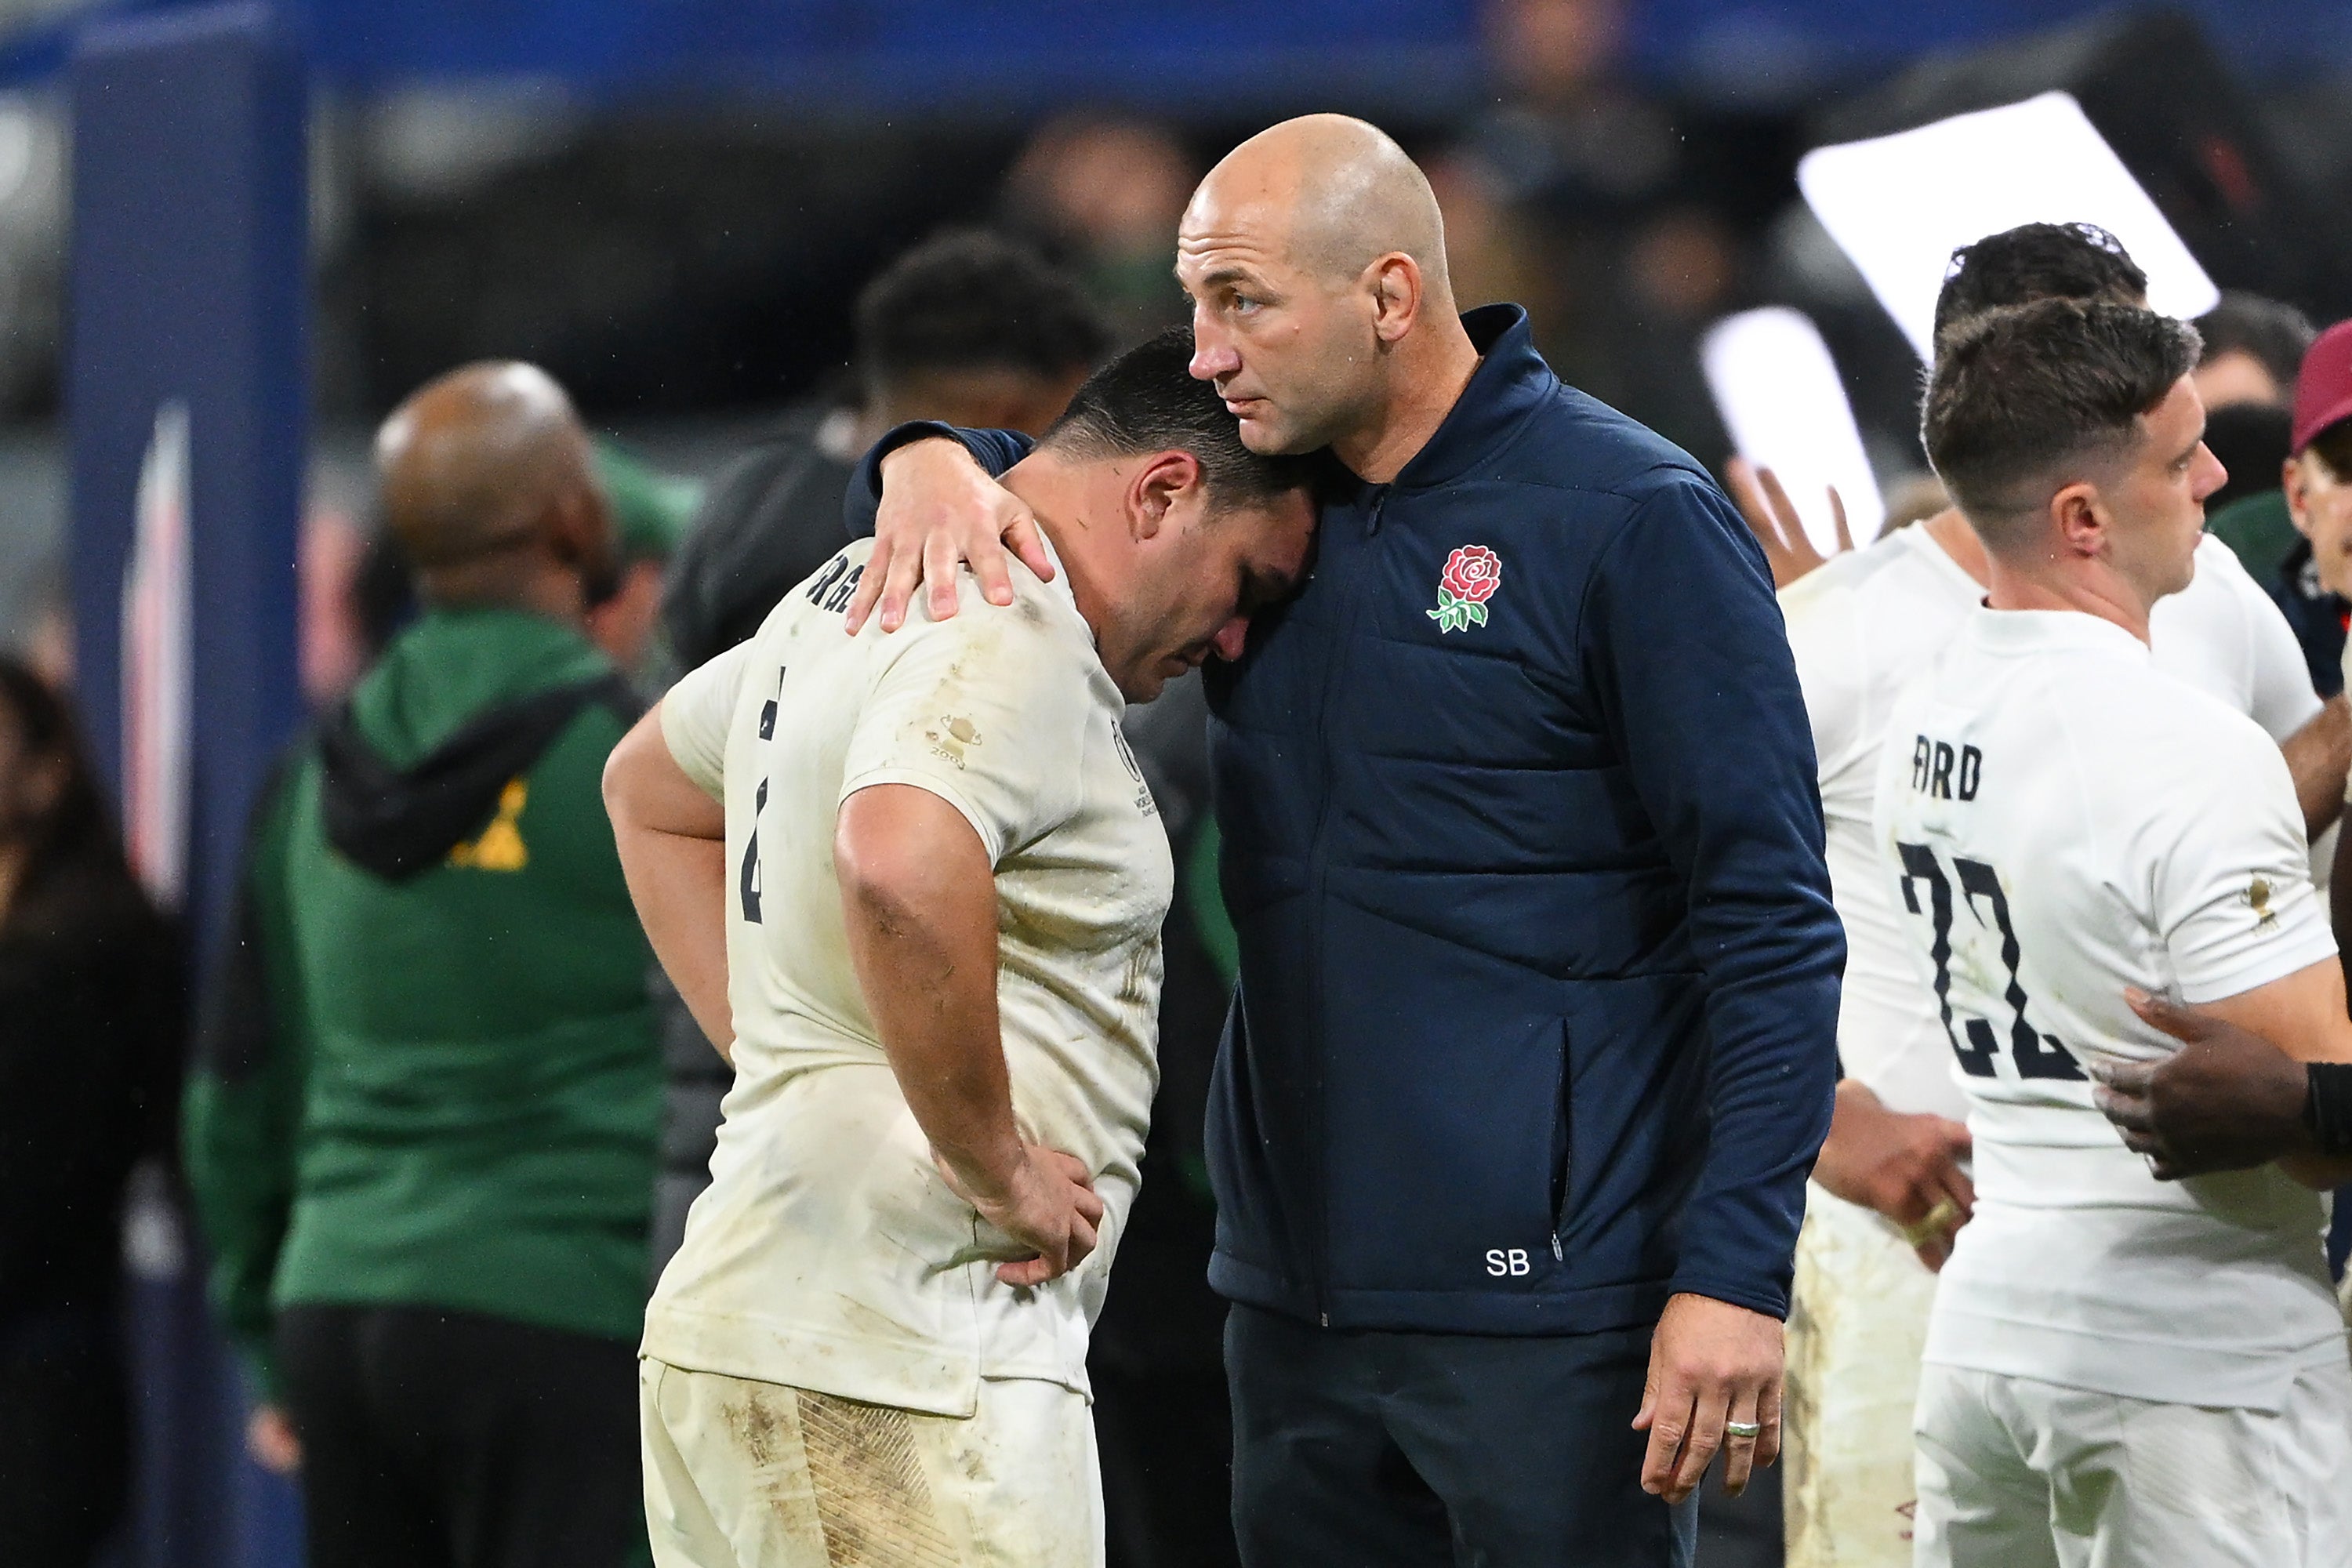 England were narrowly defeated in Paris